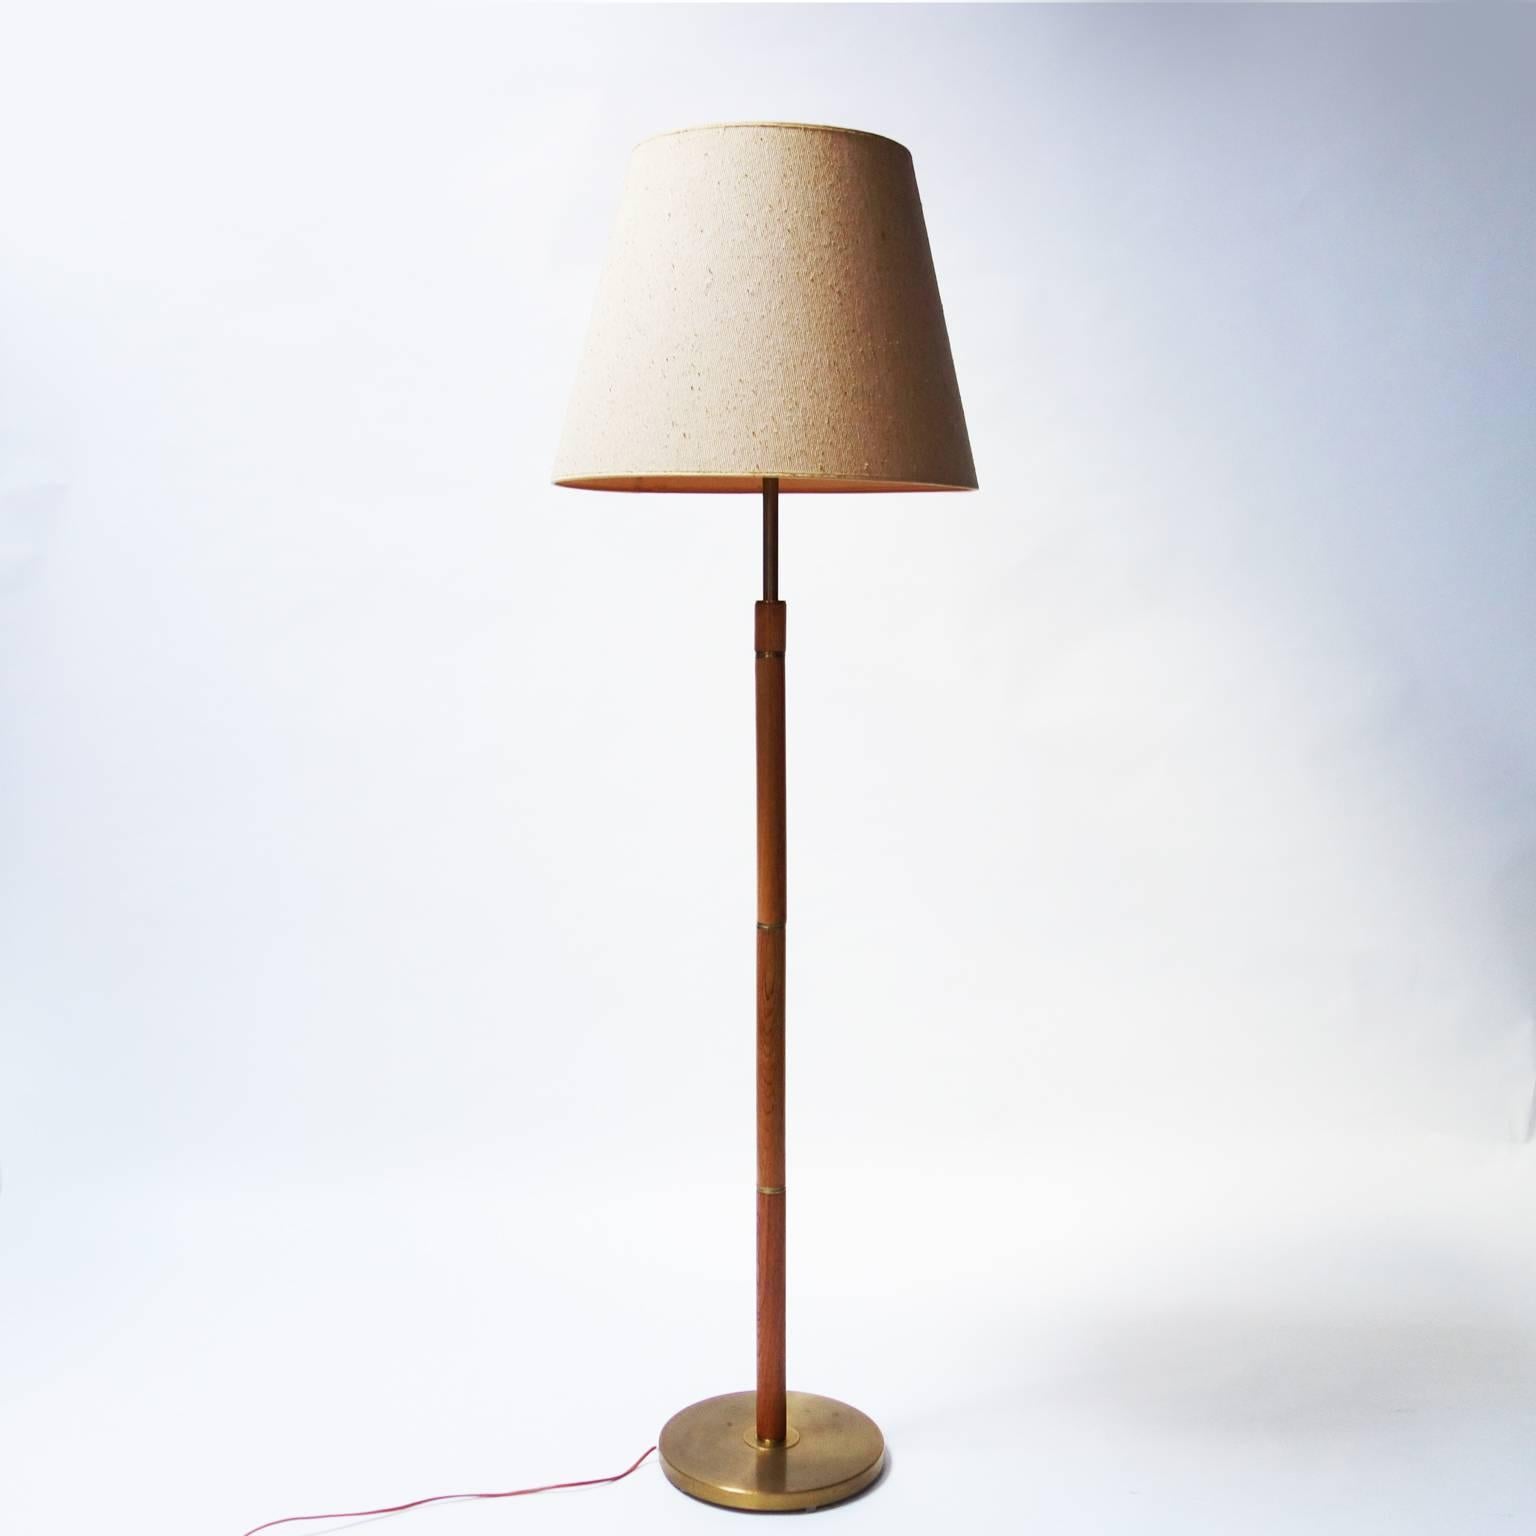 Oak and brass floor lamp from Denmark.

Elegant oak design with brass accent and base.

 